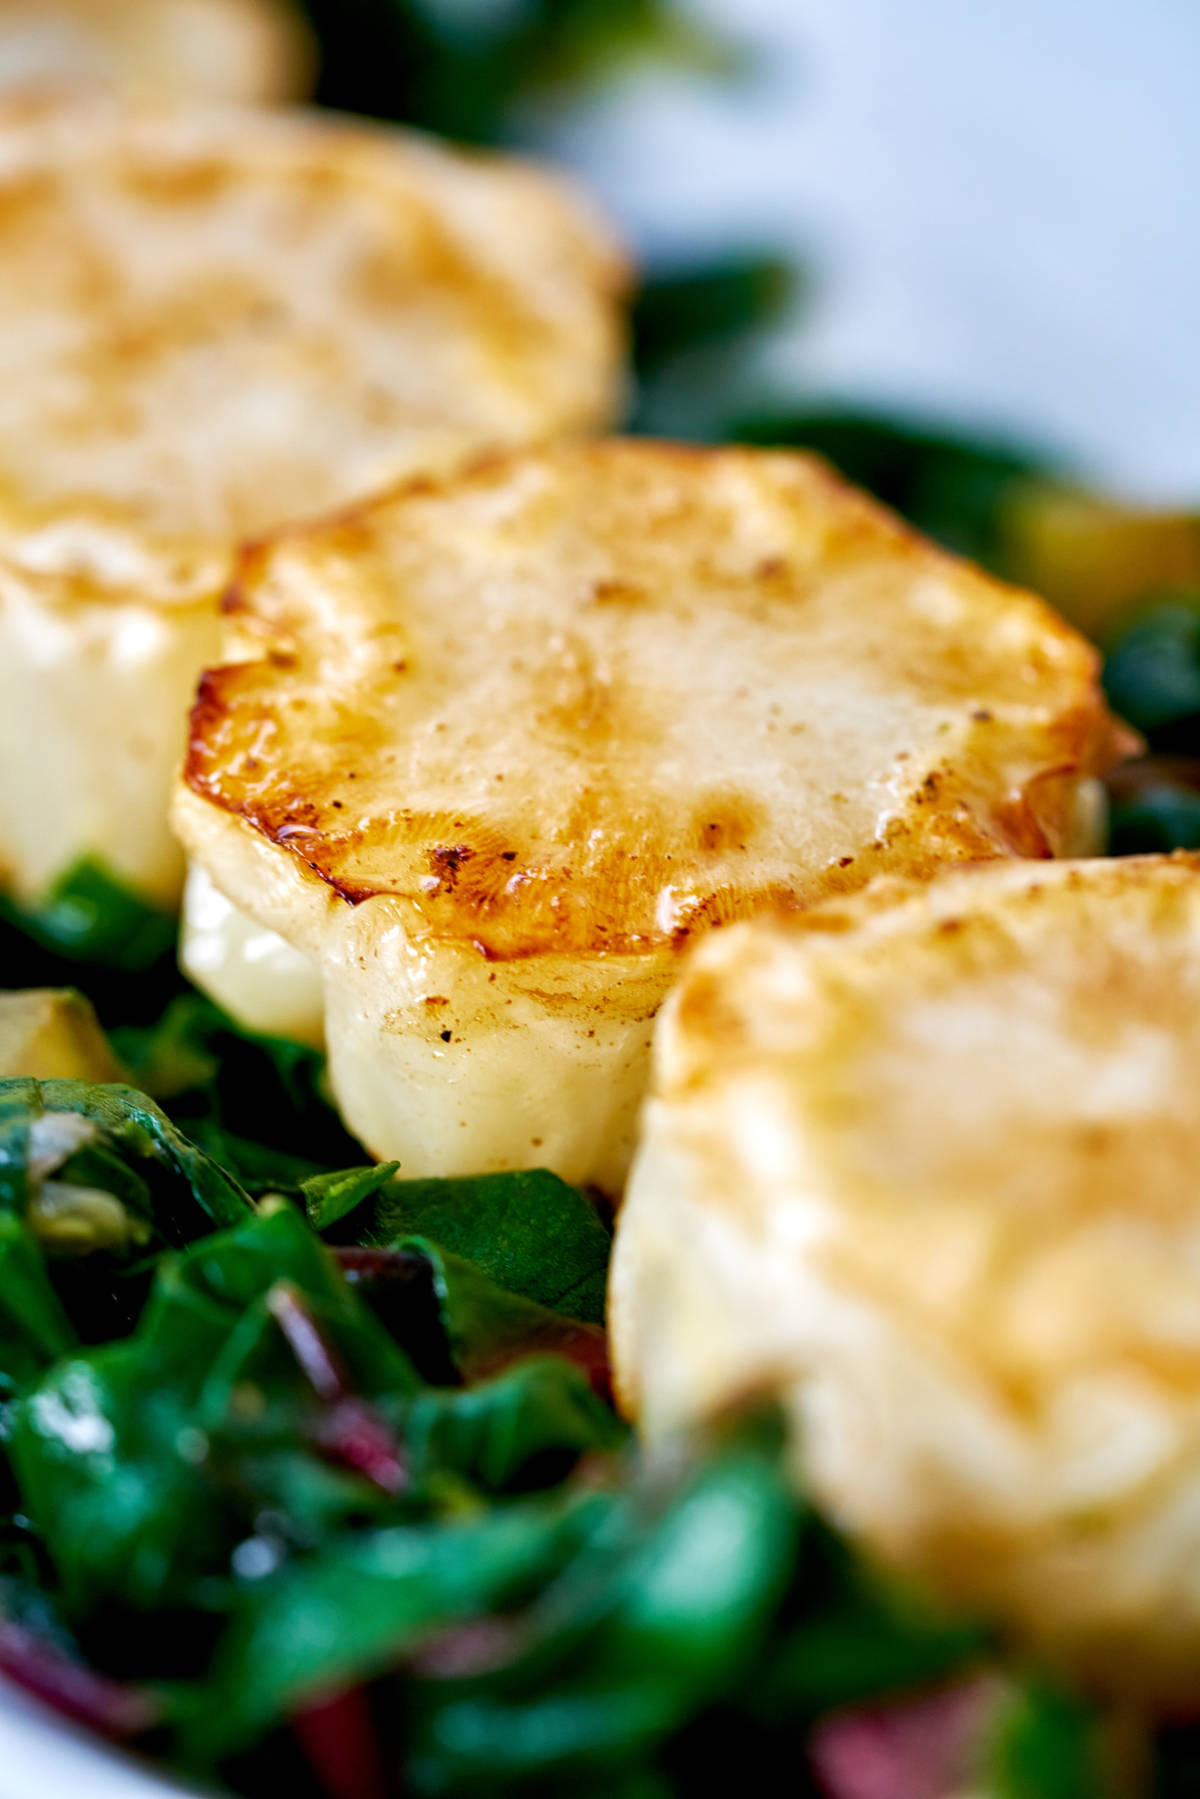 Cauliflower discs on a bed of cooked greens.